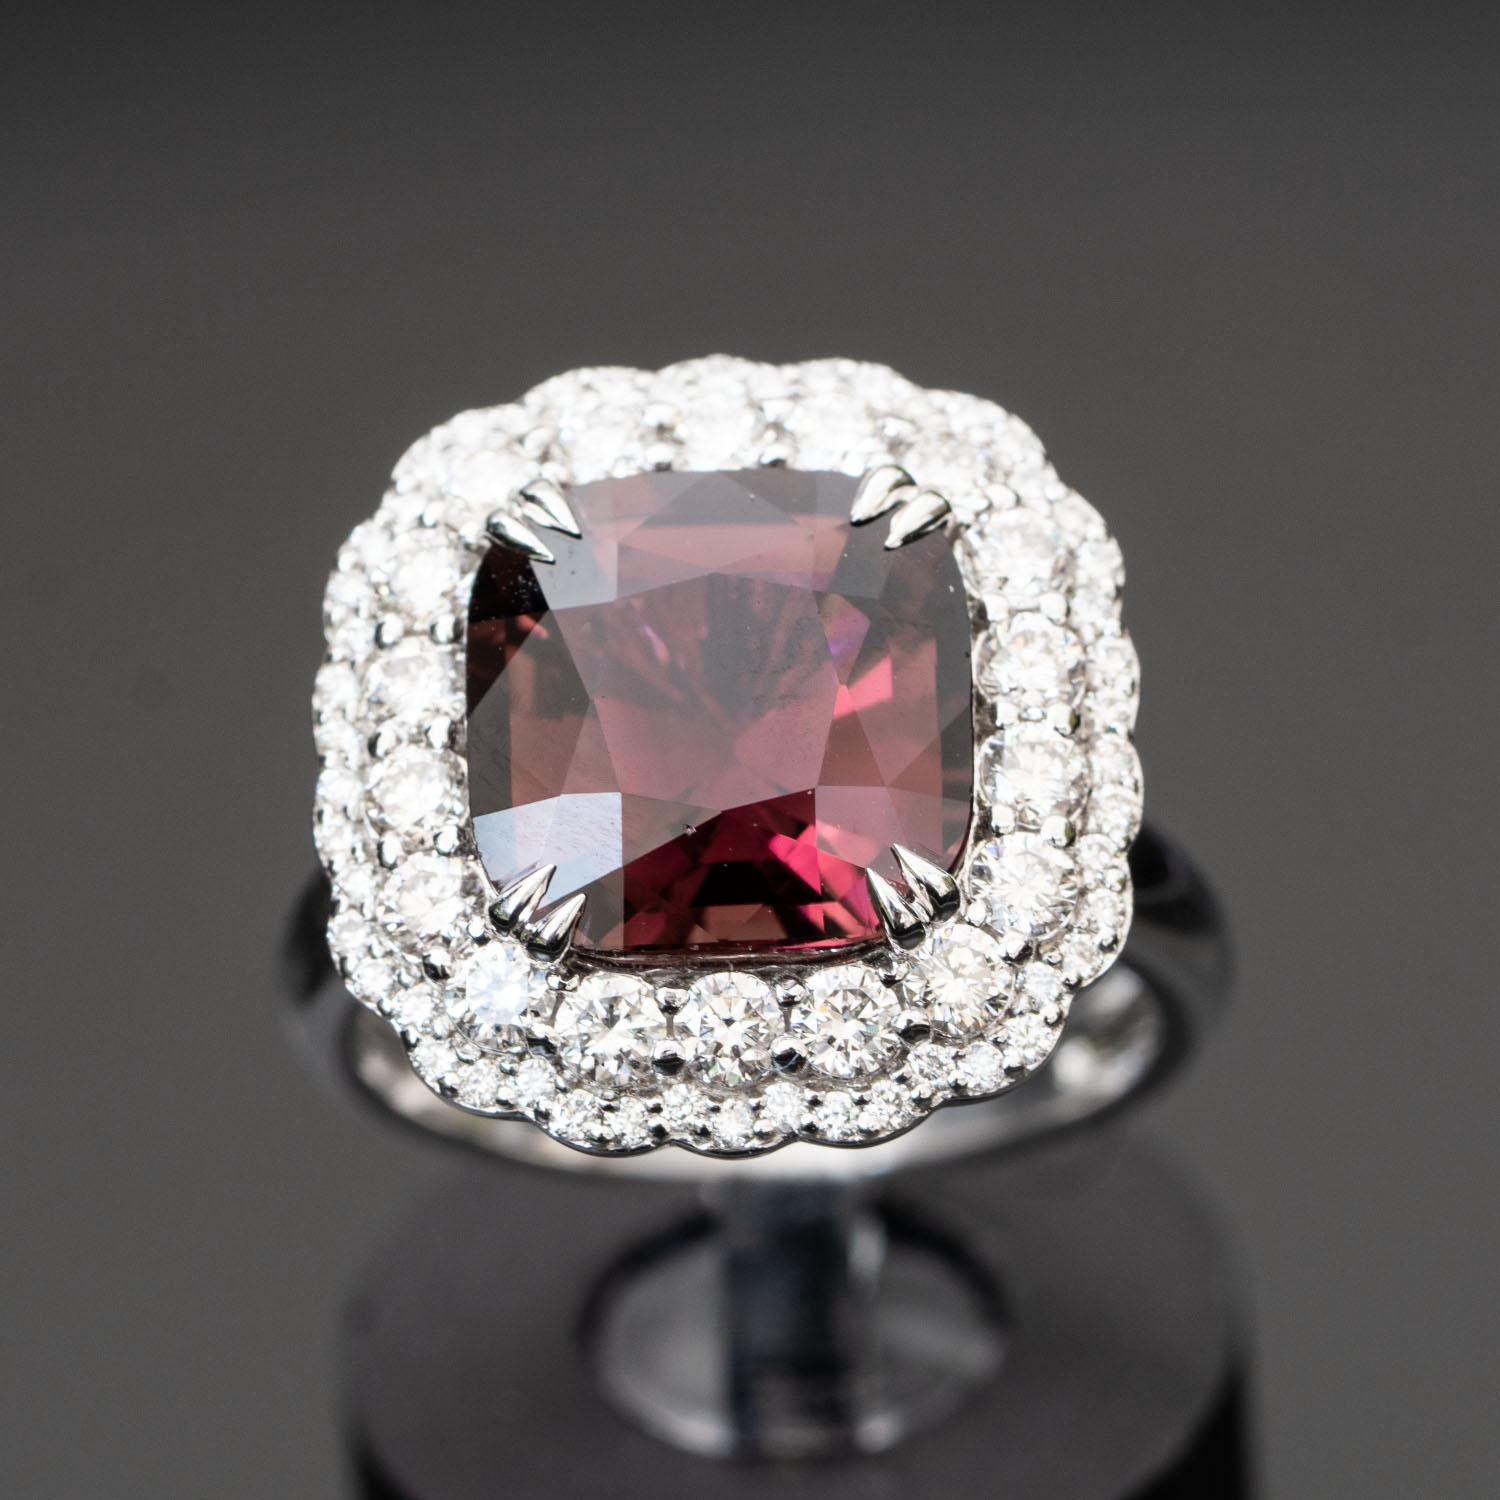 This cushion cut red tourmaline diamond ring is simply stunning! The large 4.86 carat (10.80mmX10.53mm) natural central tourmaline surrounded by 1.16 carat sparkling natural diamonds D- F VVS.

Main Stone: Natural, Genuine Tourmaline
Carat: 4.86